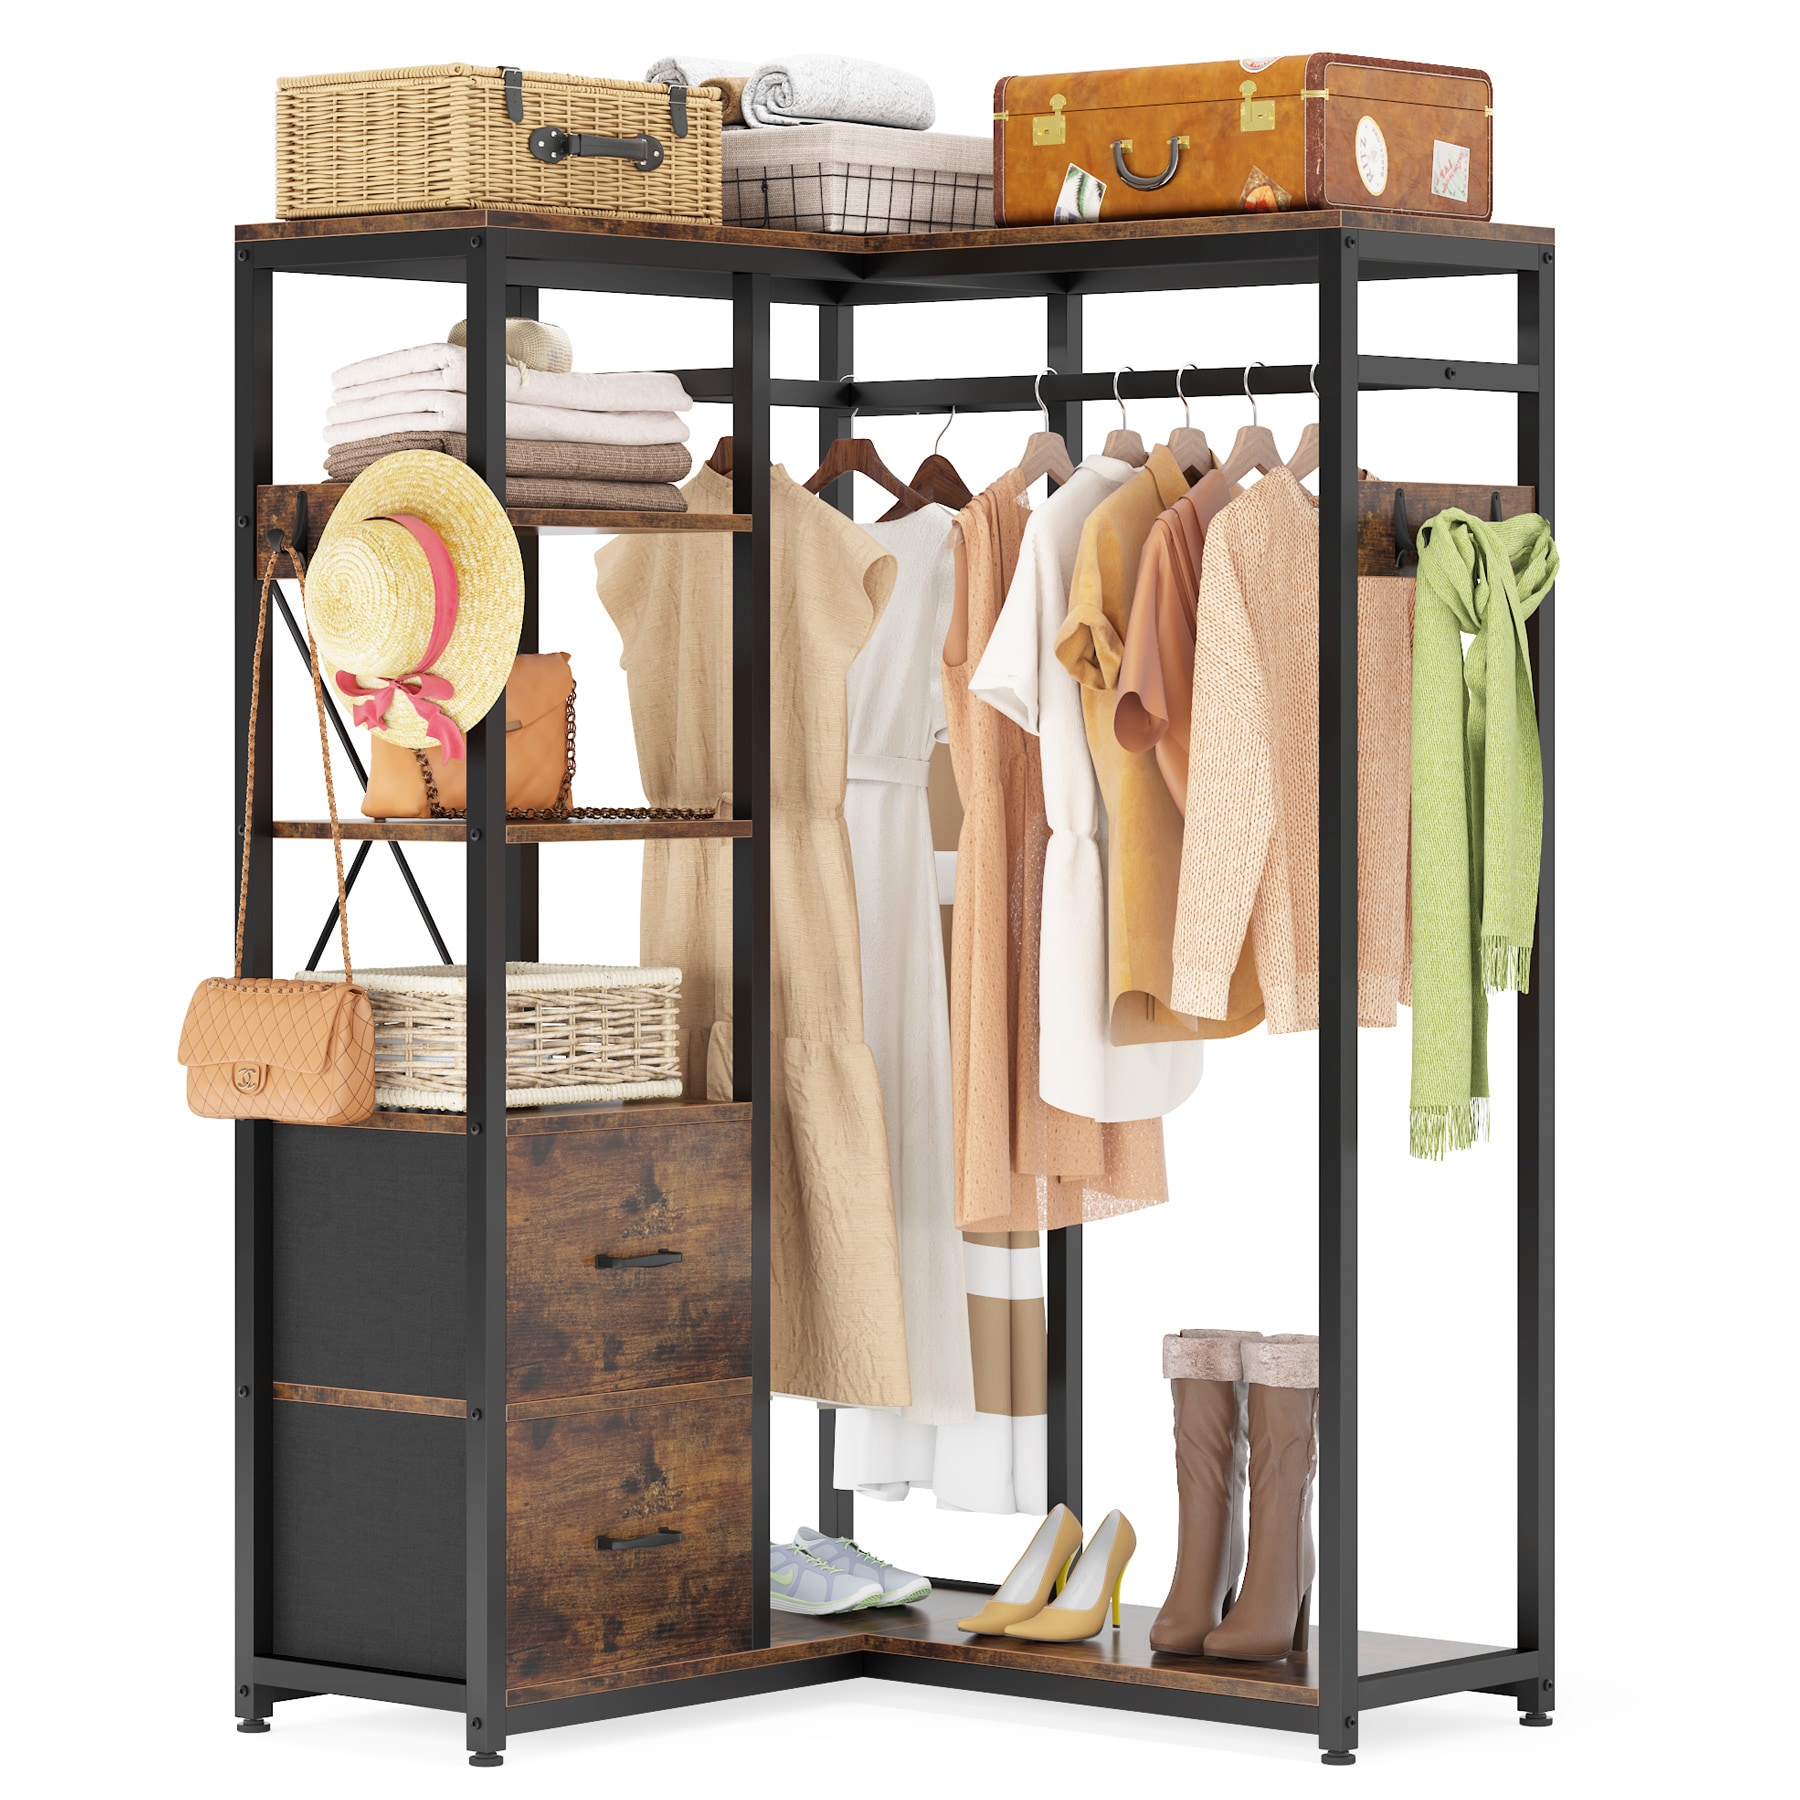 Tribesigns Industrial Style Freestanding Clothing Rack with Shelves, Drawers, and Hooks - Brown, 66.92-in Height, 350 lbs. Weight Capacity Walnut